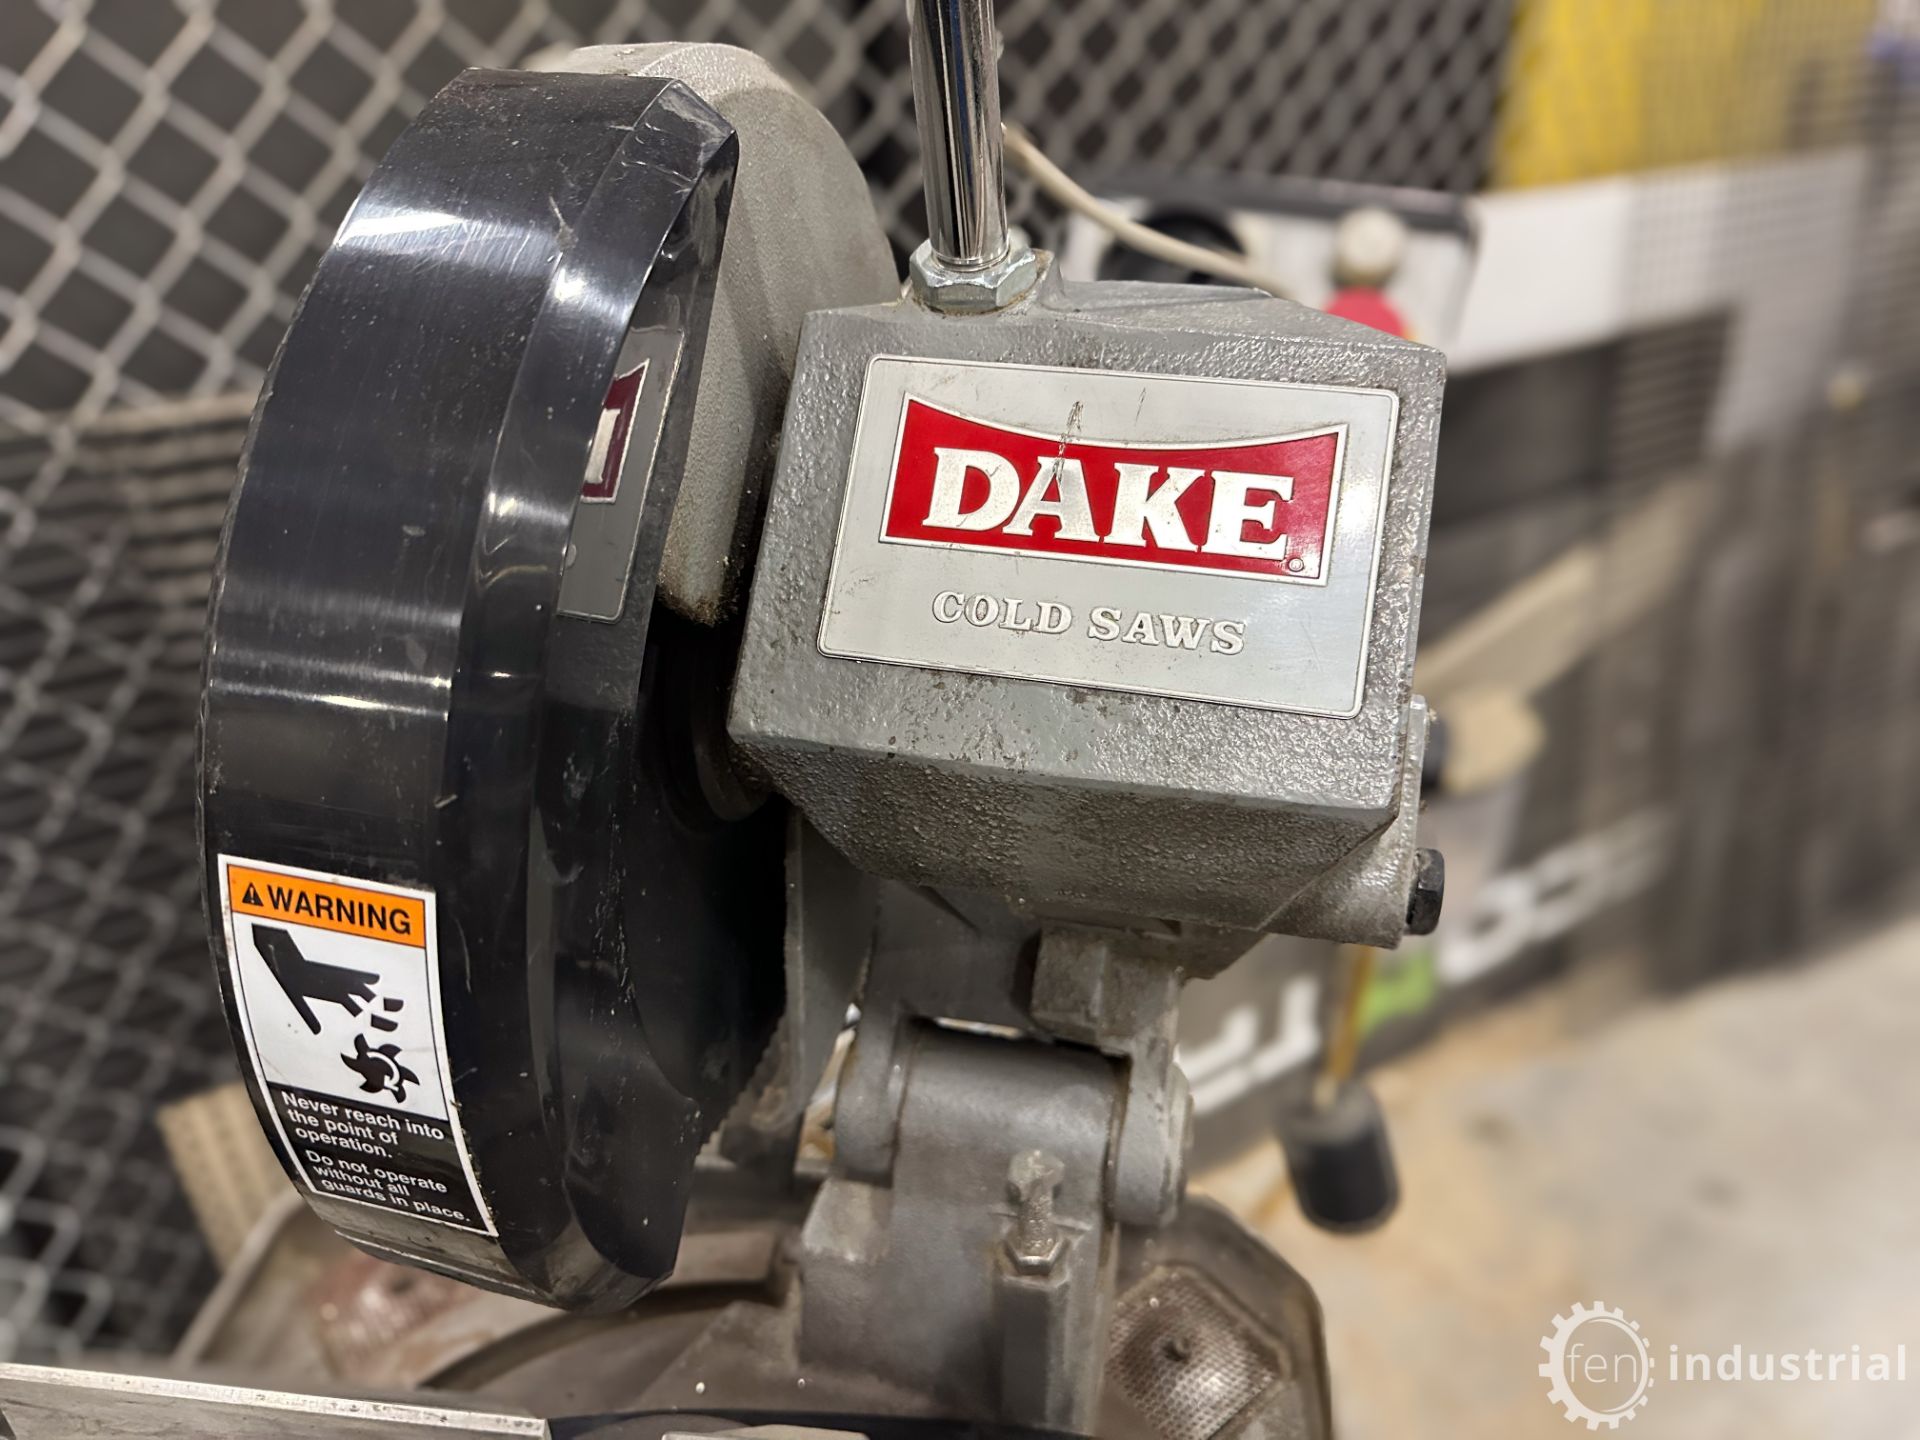 2016 STHEMMA / DAKE 315 S. CUT COLD SAW, S/N 0900744 (RIGGING FEE $100) - Image 6 of 27